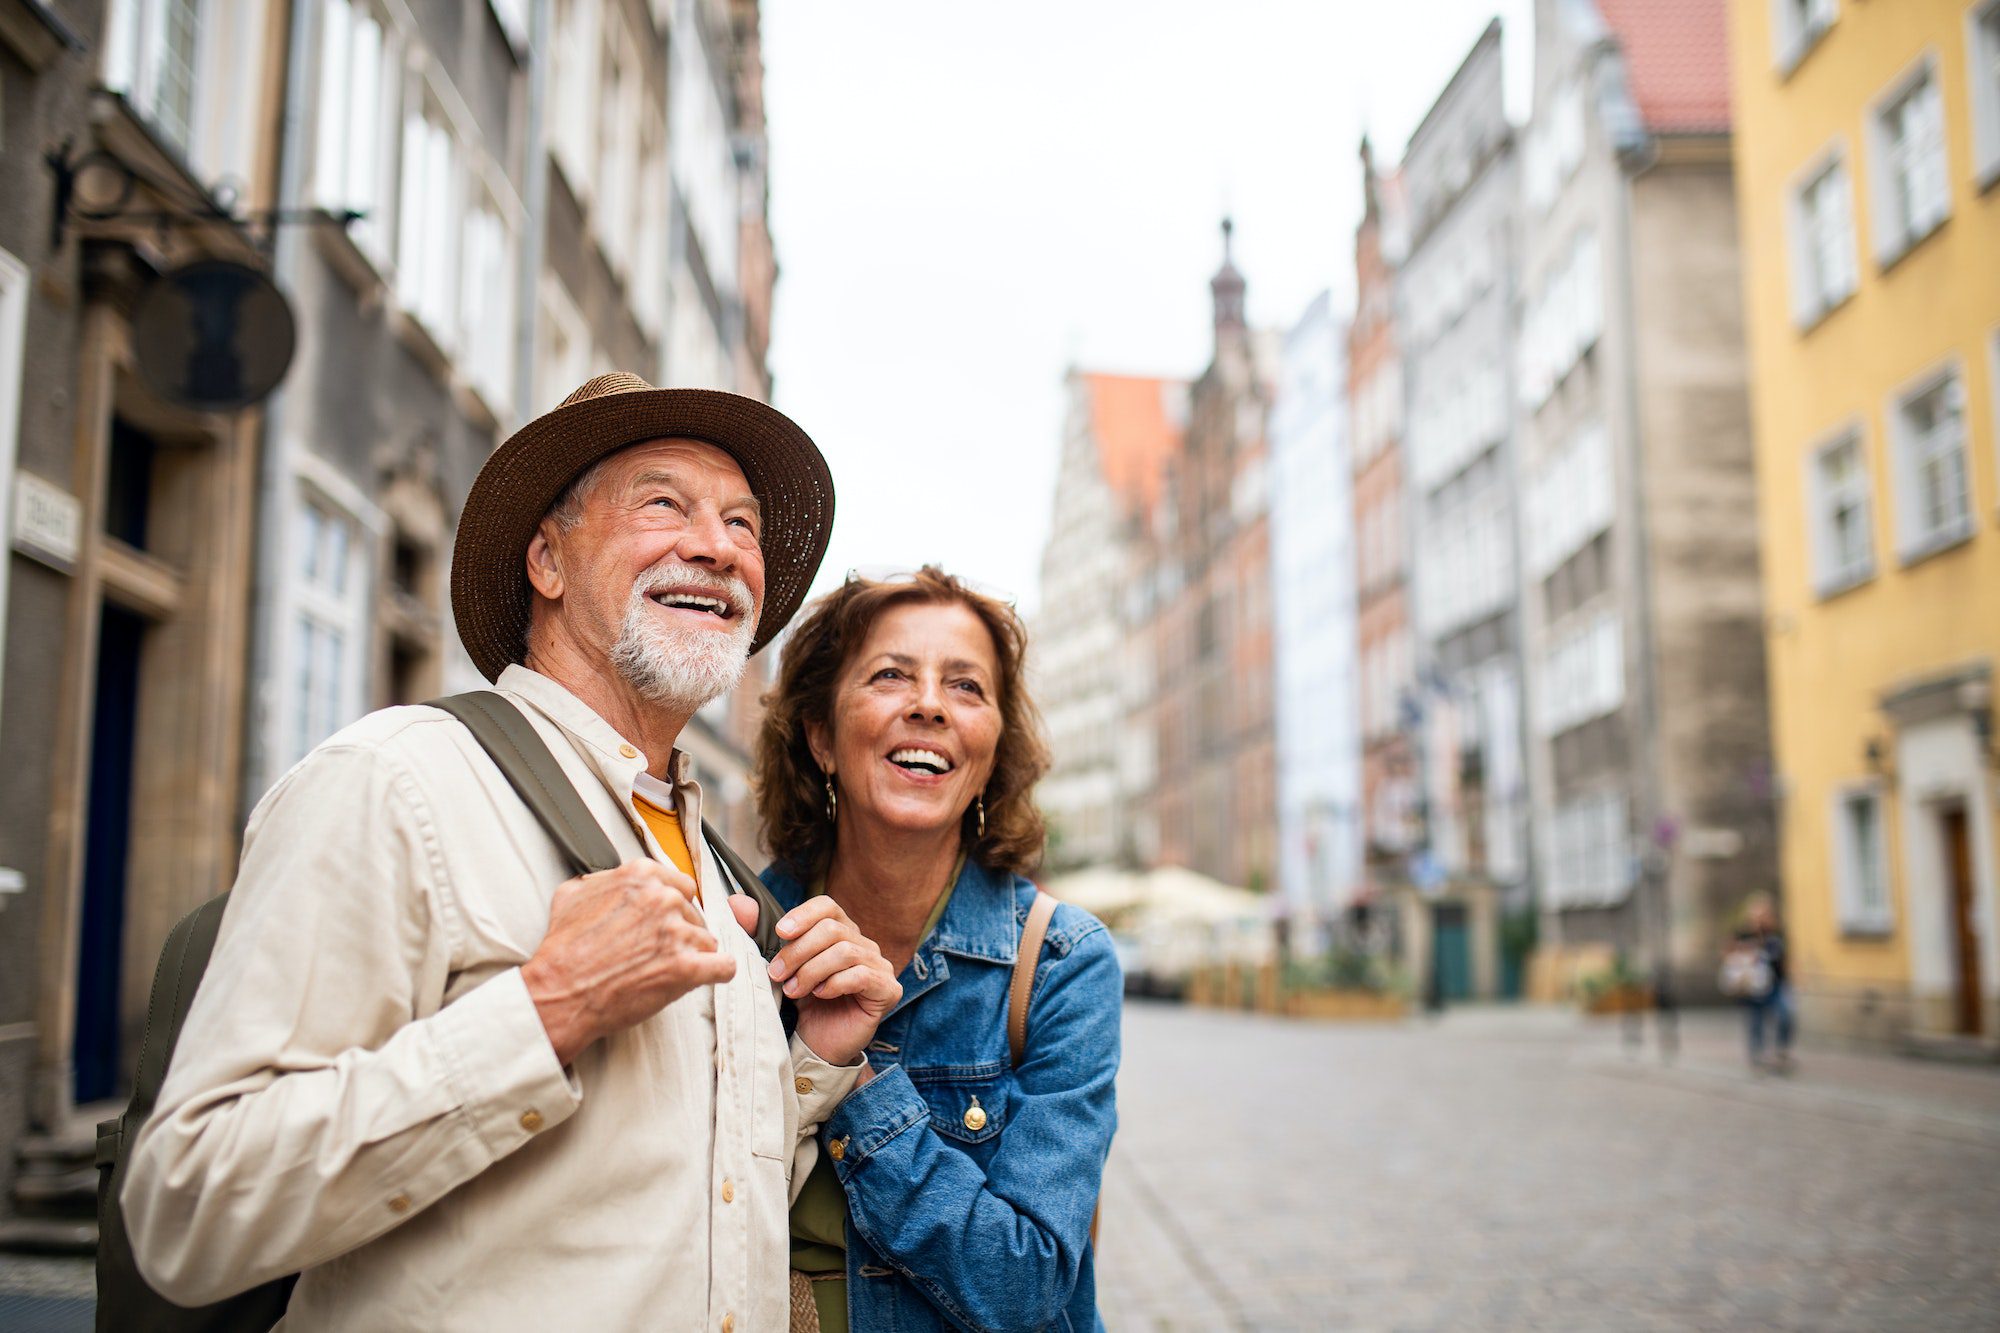 Portrait of happy senior couple tourists outdoors in historic town with Medigap Plan C